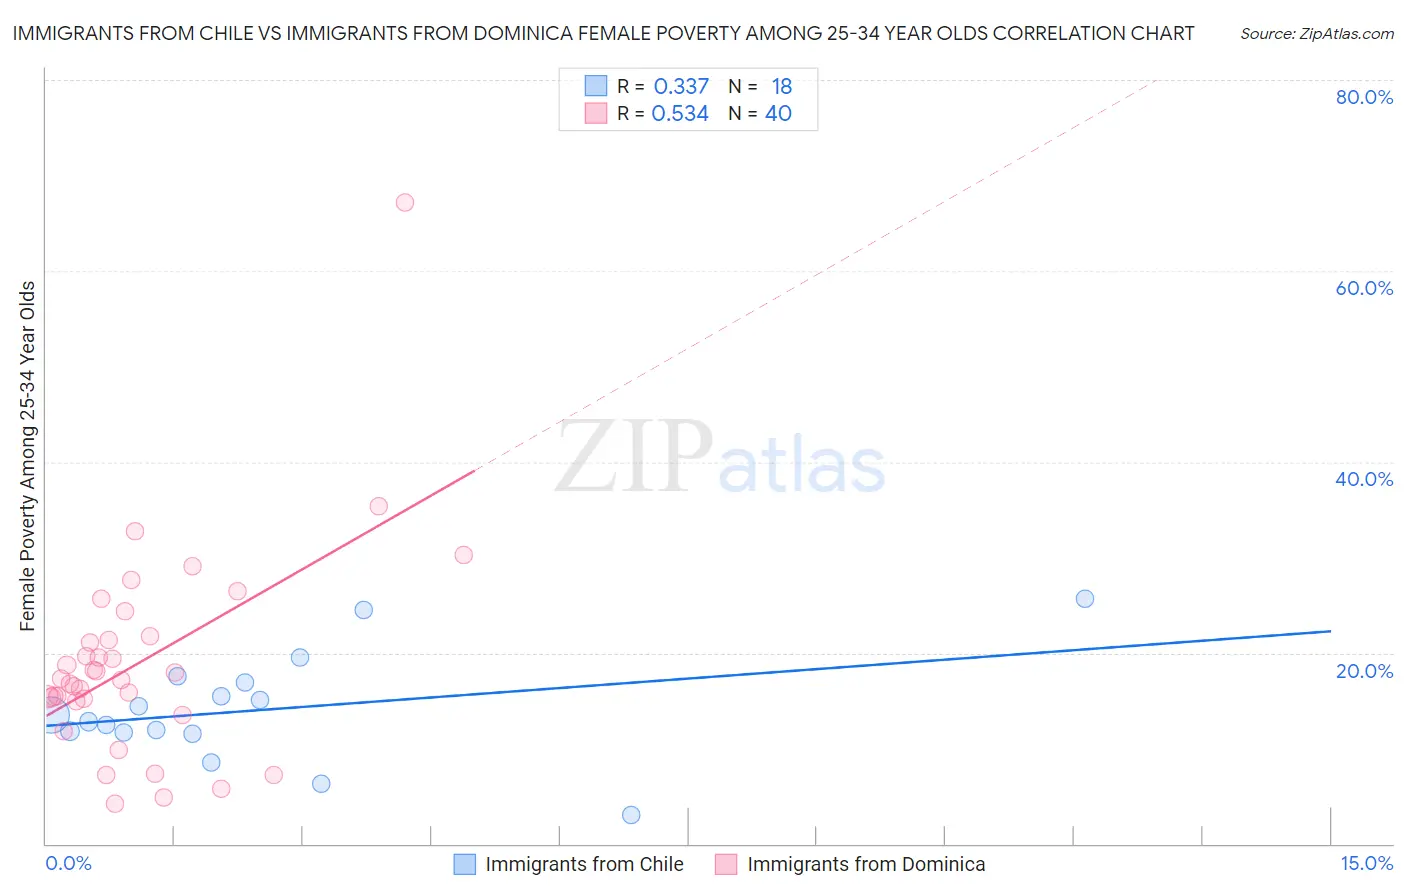 Immigrants from Chile vs Immigrants from Dominica Female Poverty Among 25-34 Year Olds